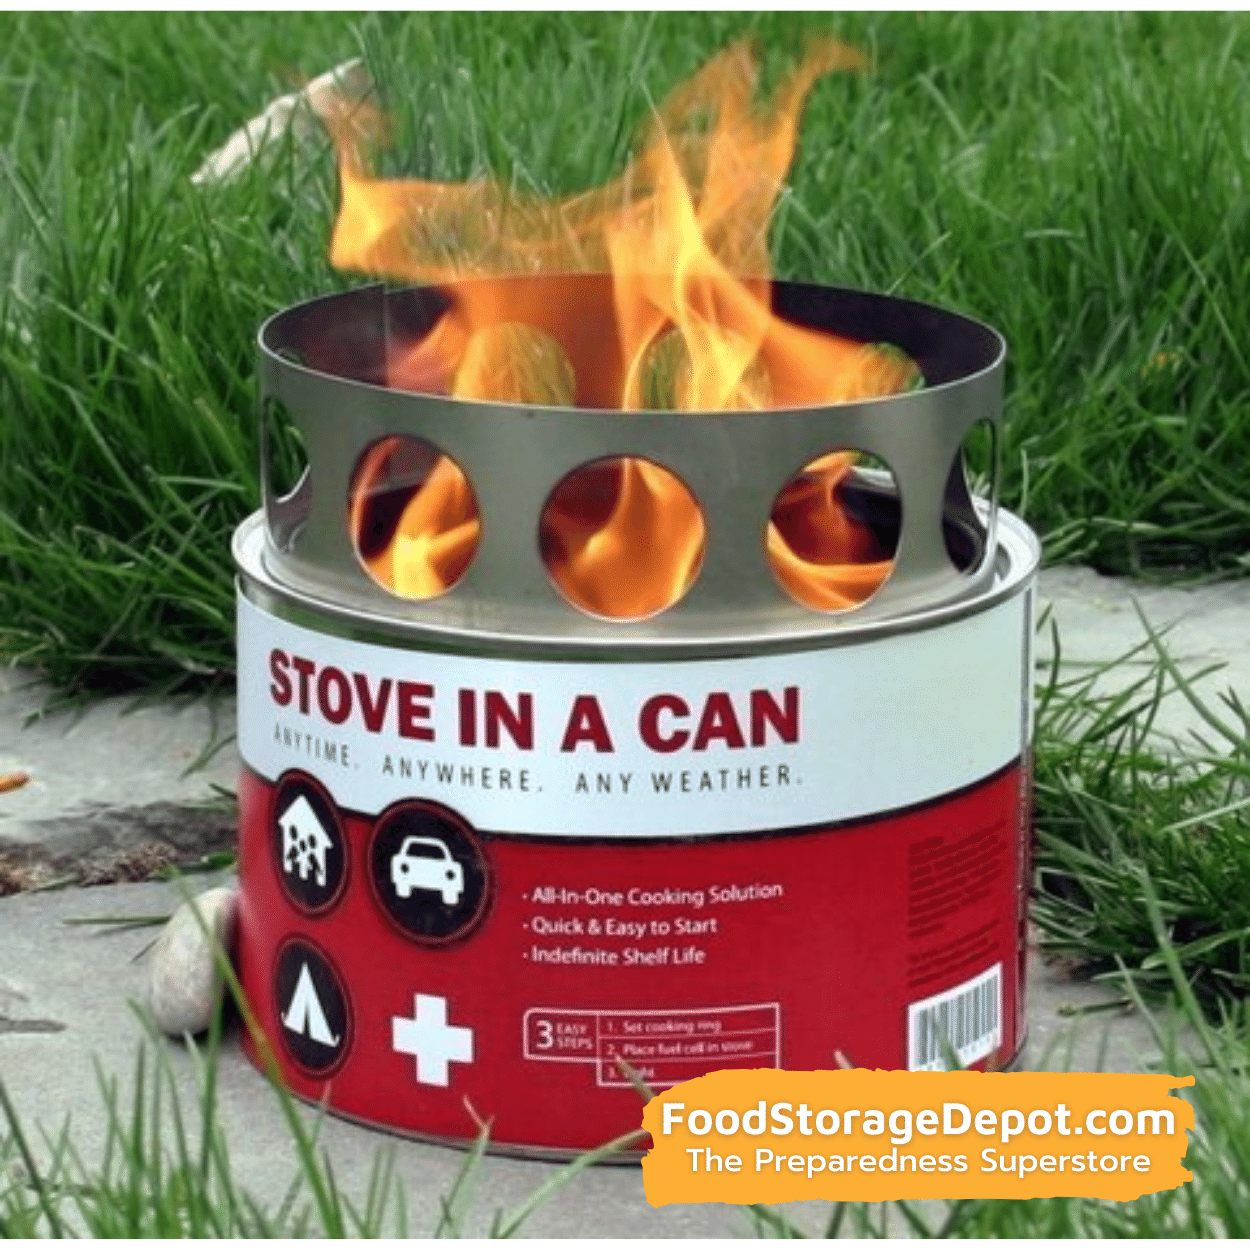 Stove in a Can